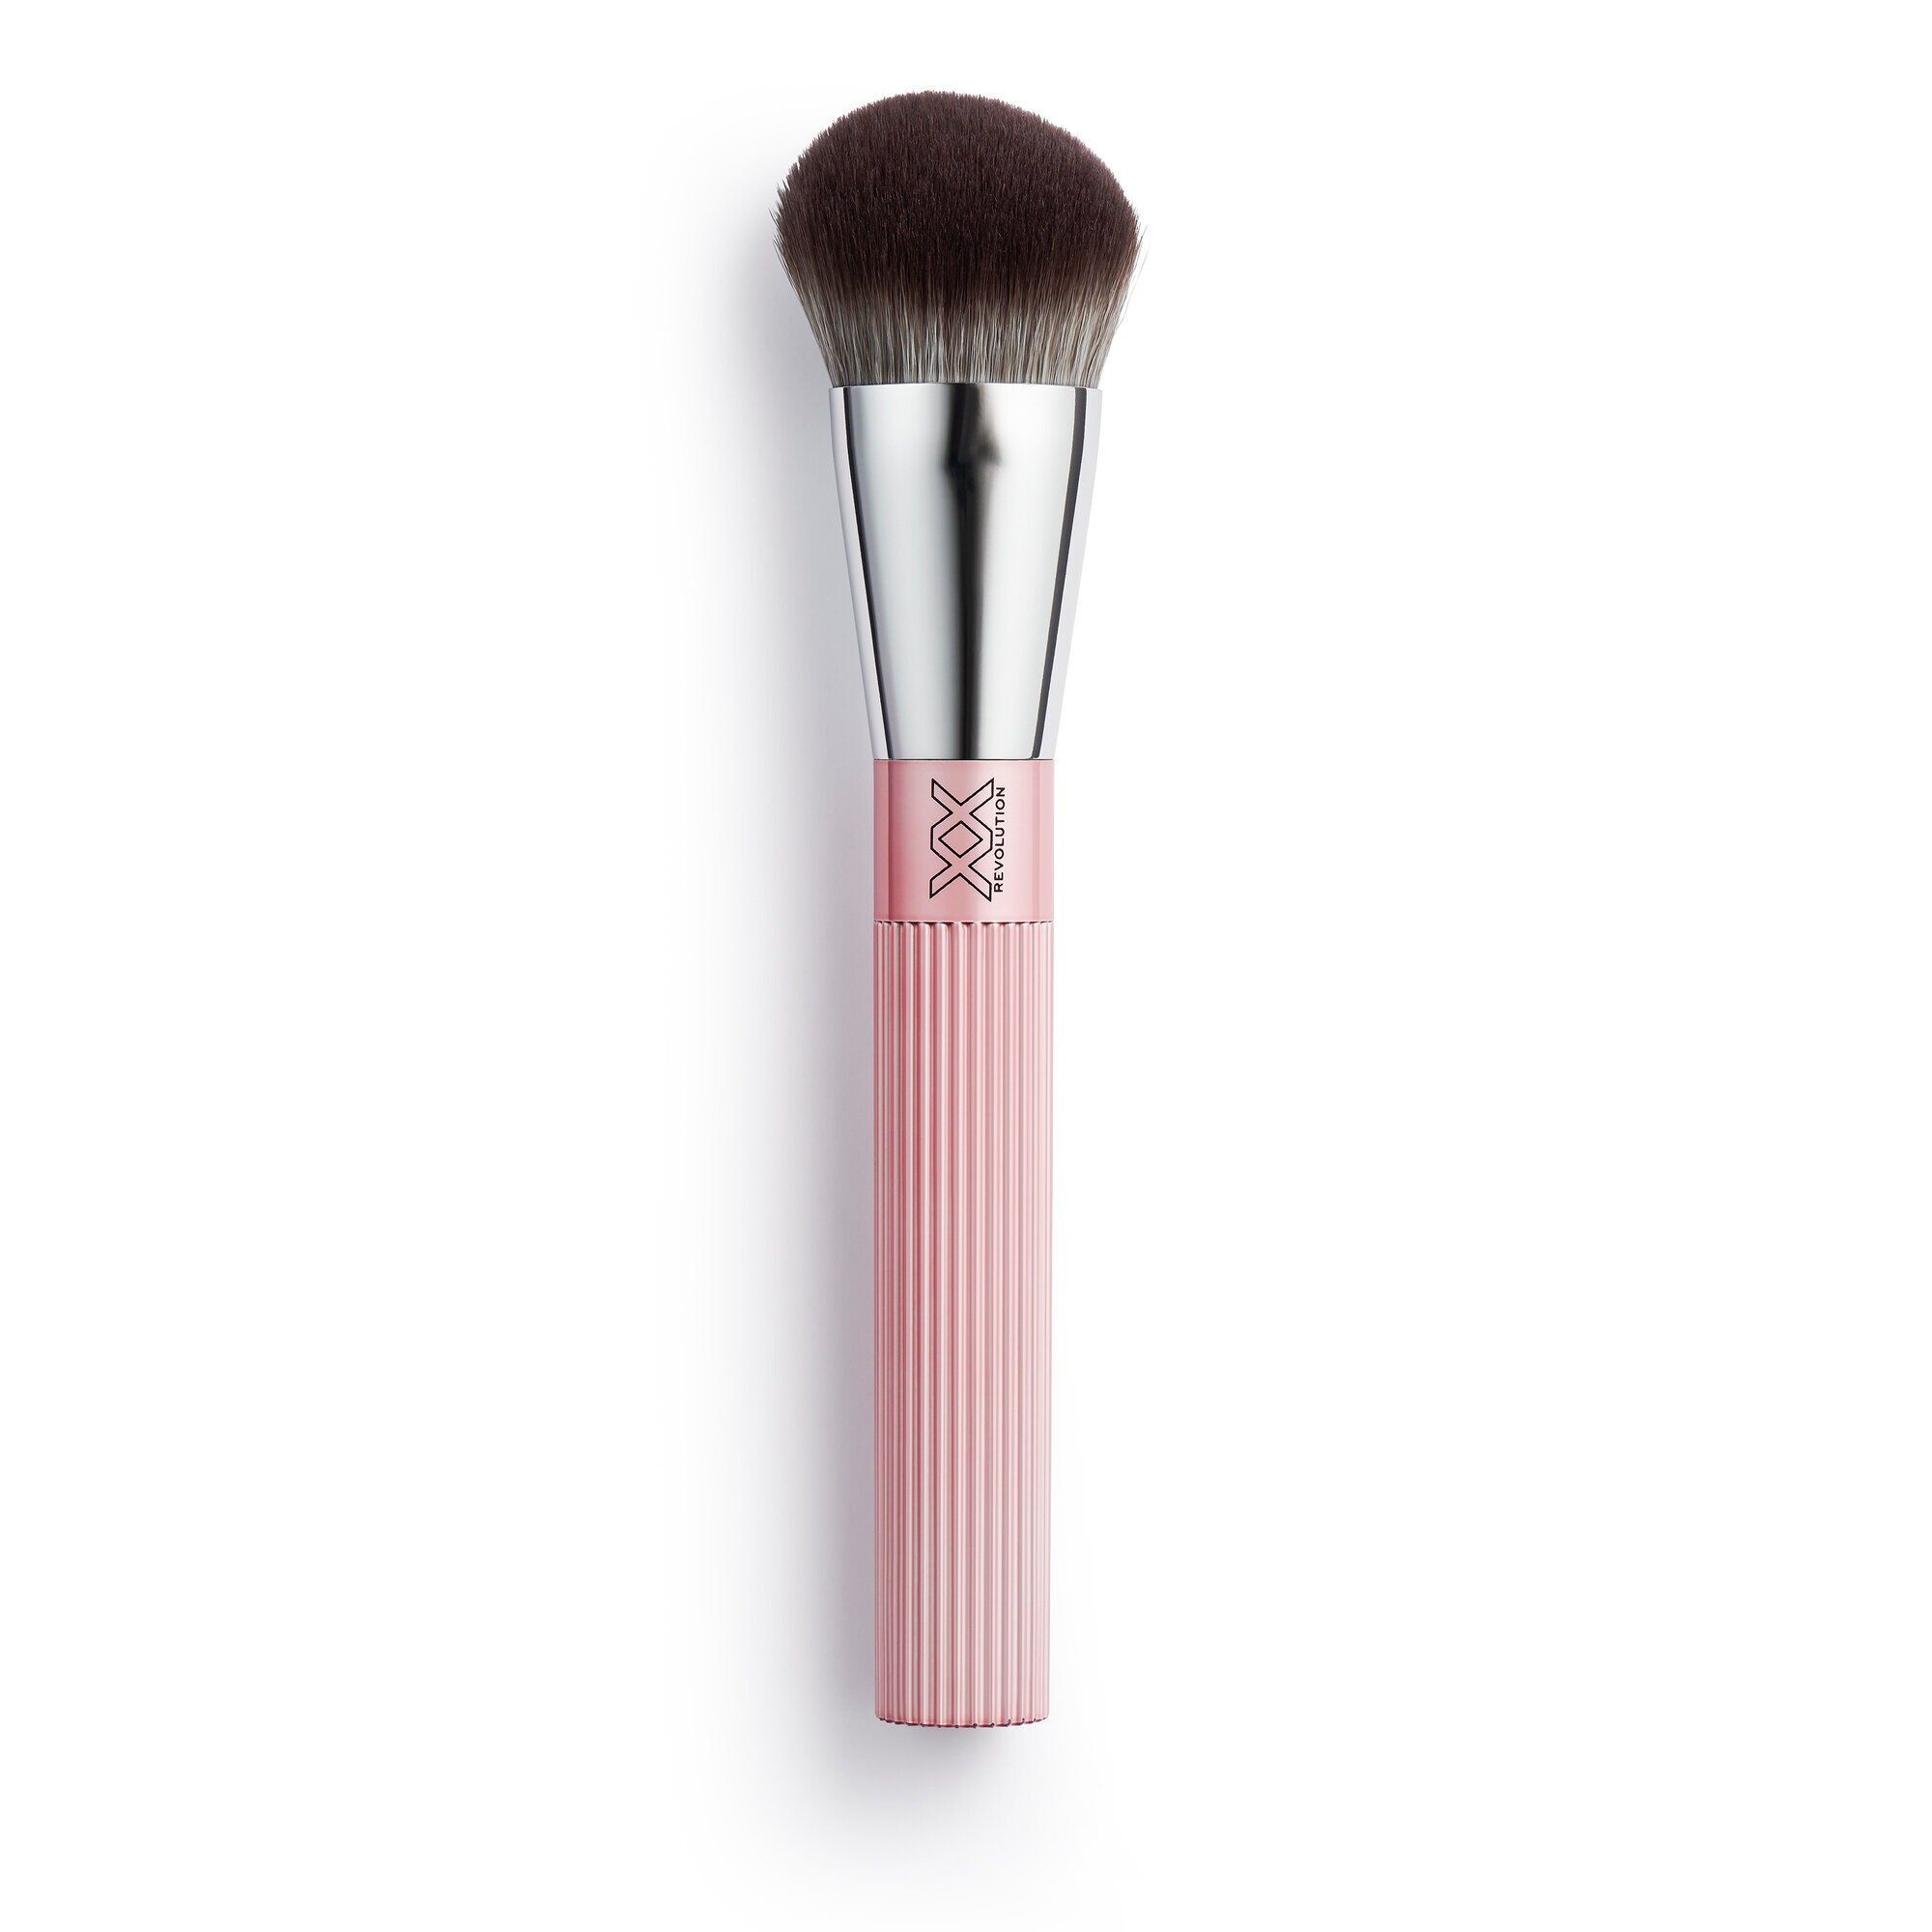 Foundation Brush - The Specialist - Angled Face Buffing Brush